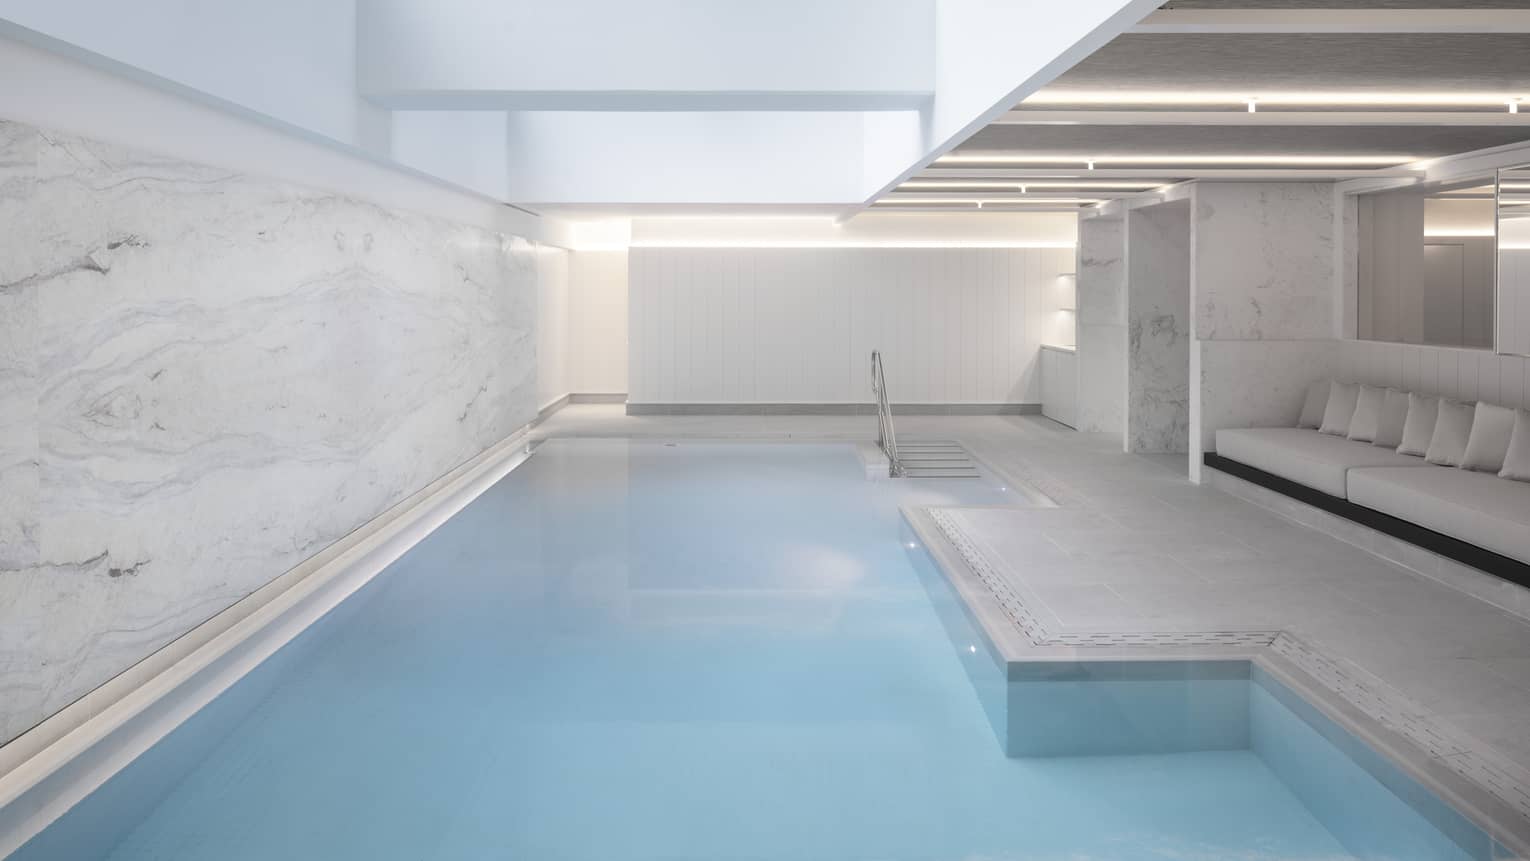 Indoor pool at spa, banquet of seating on one side, marbled wall on other 